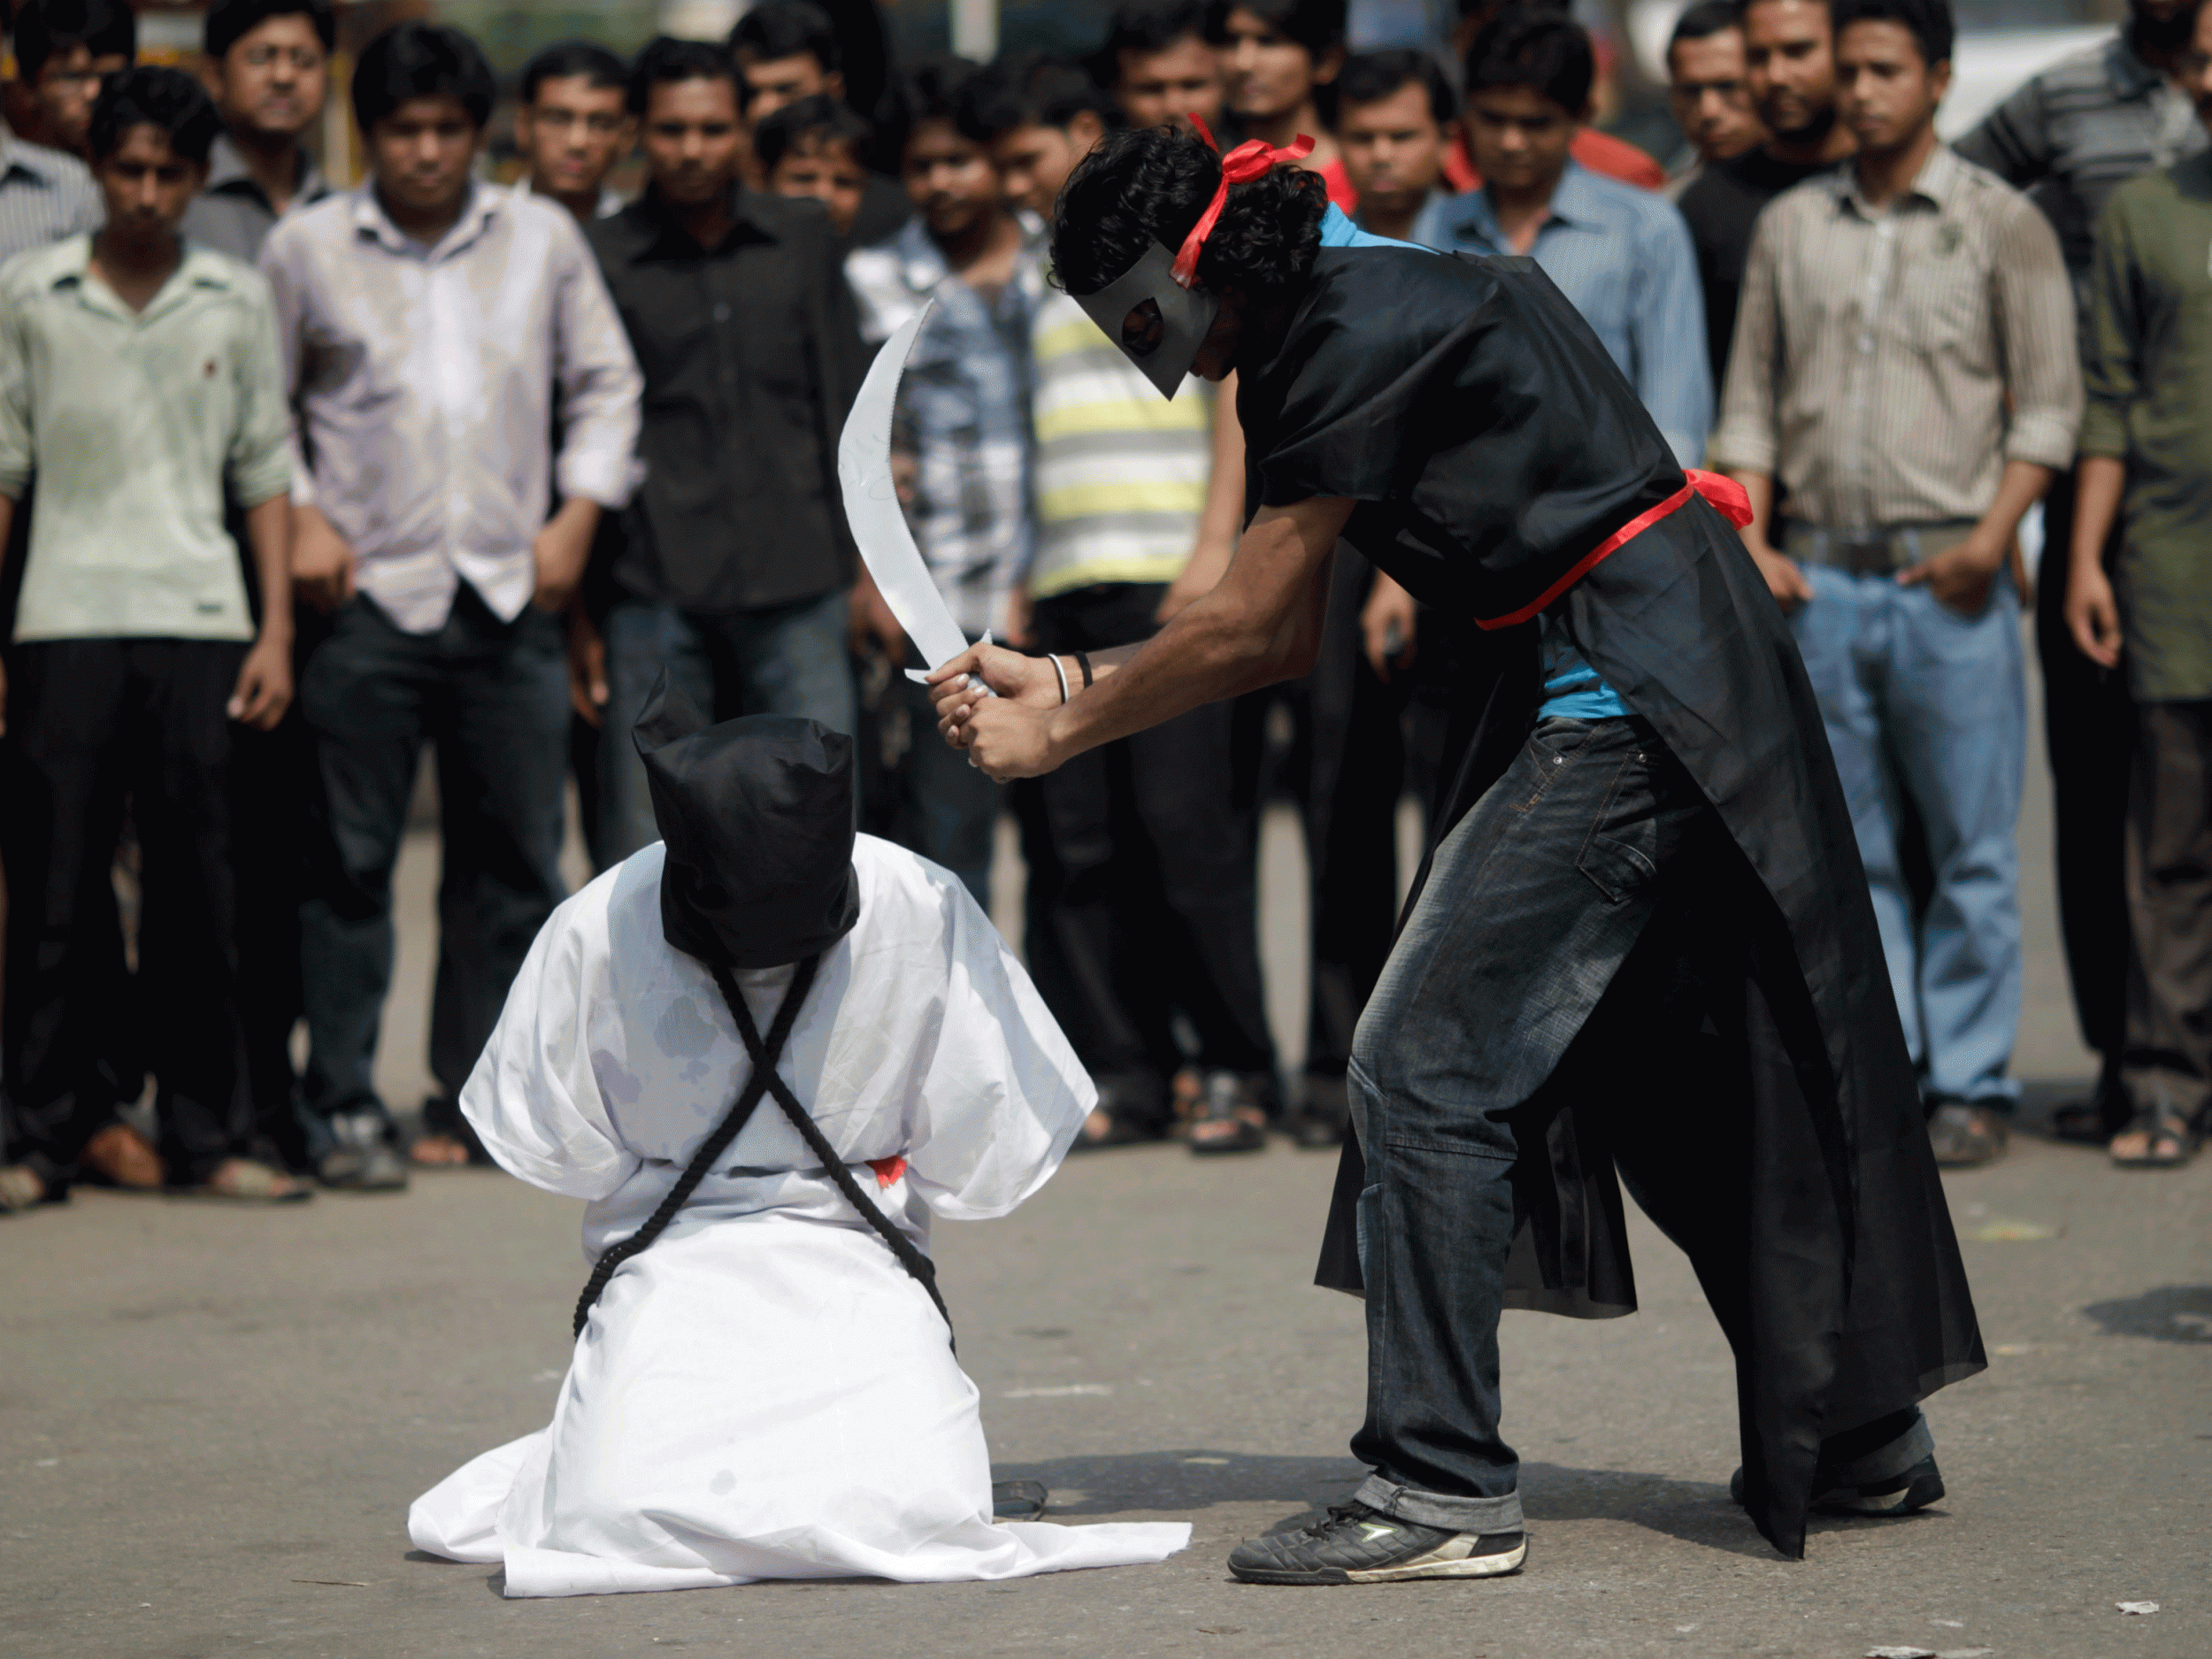 Protesters against the beheading of foreign workers in Saudi Arabia stage a mock beheading